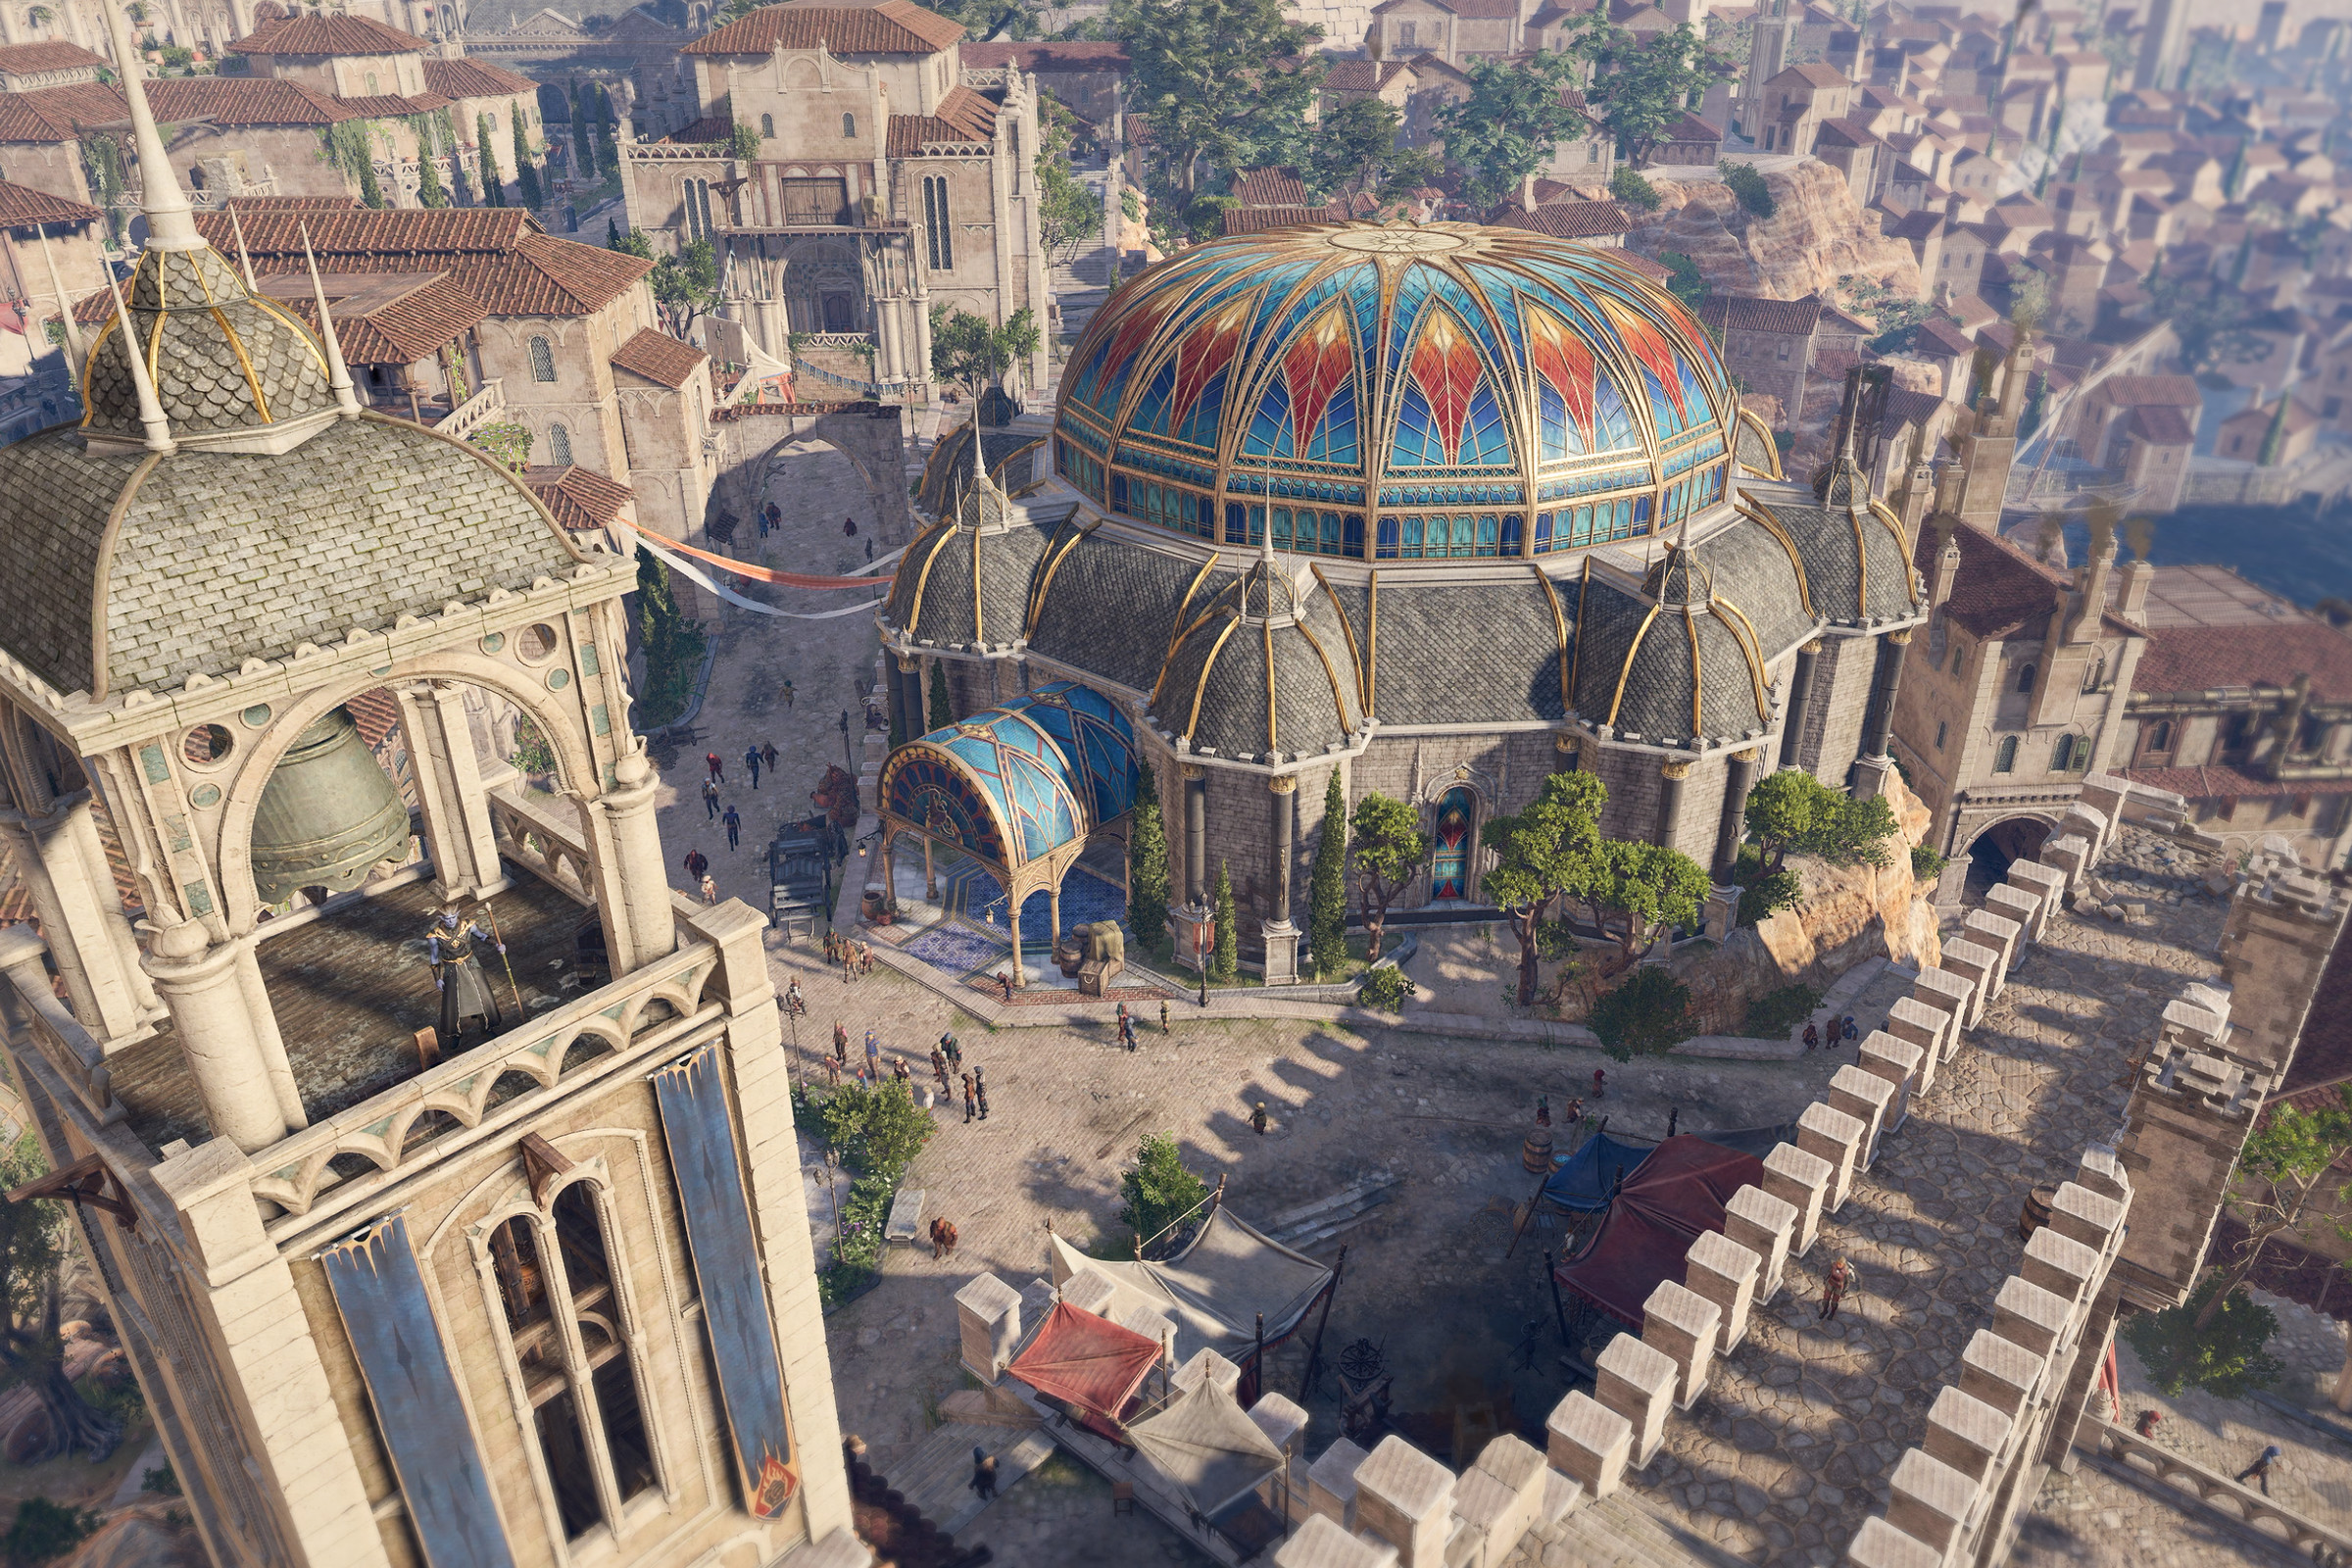 Screenshot from Baldur’s Gate 3 featuring an aerial shot of the main city including a colorful blue and red dome.